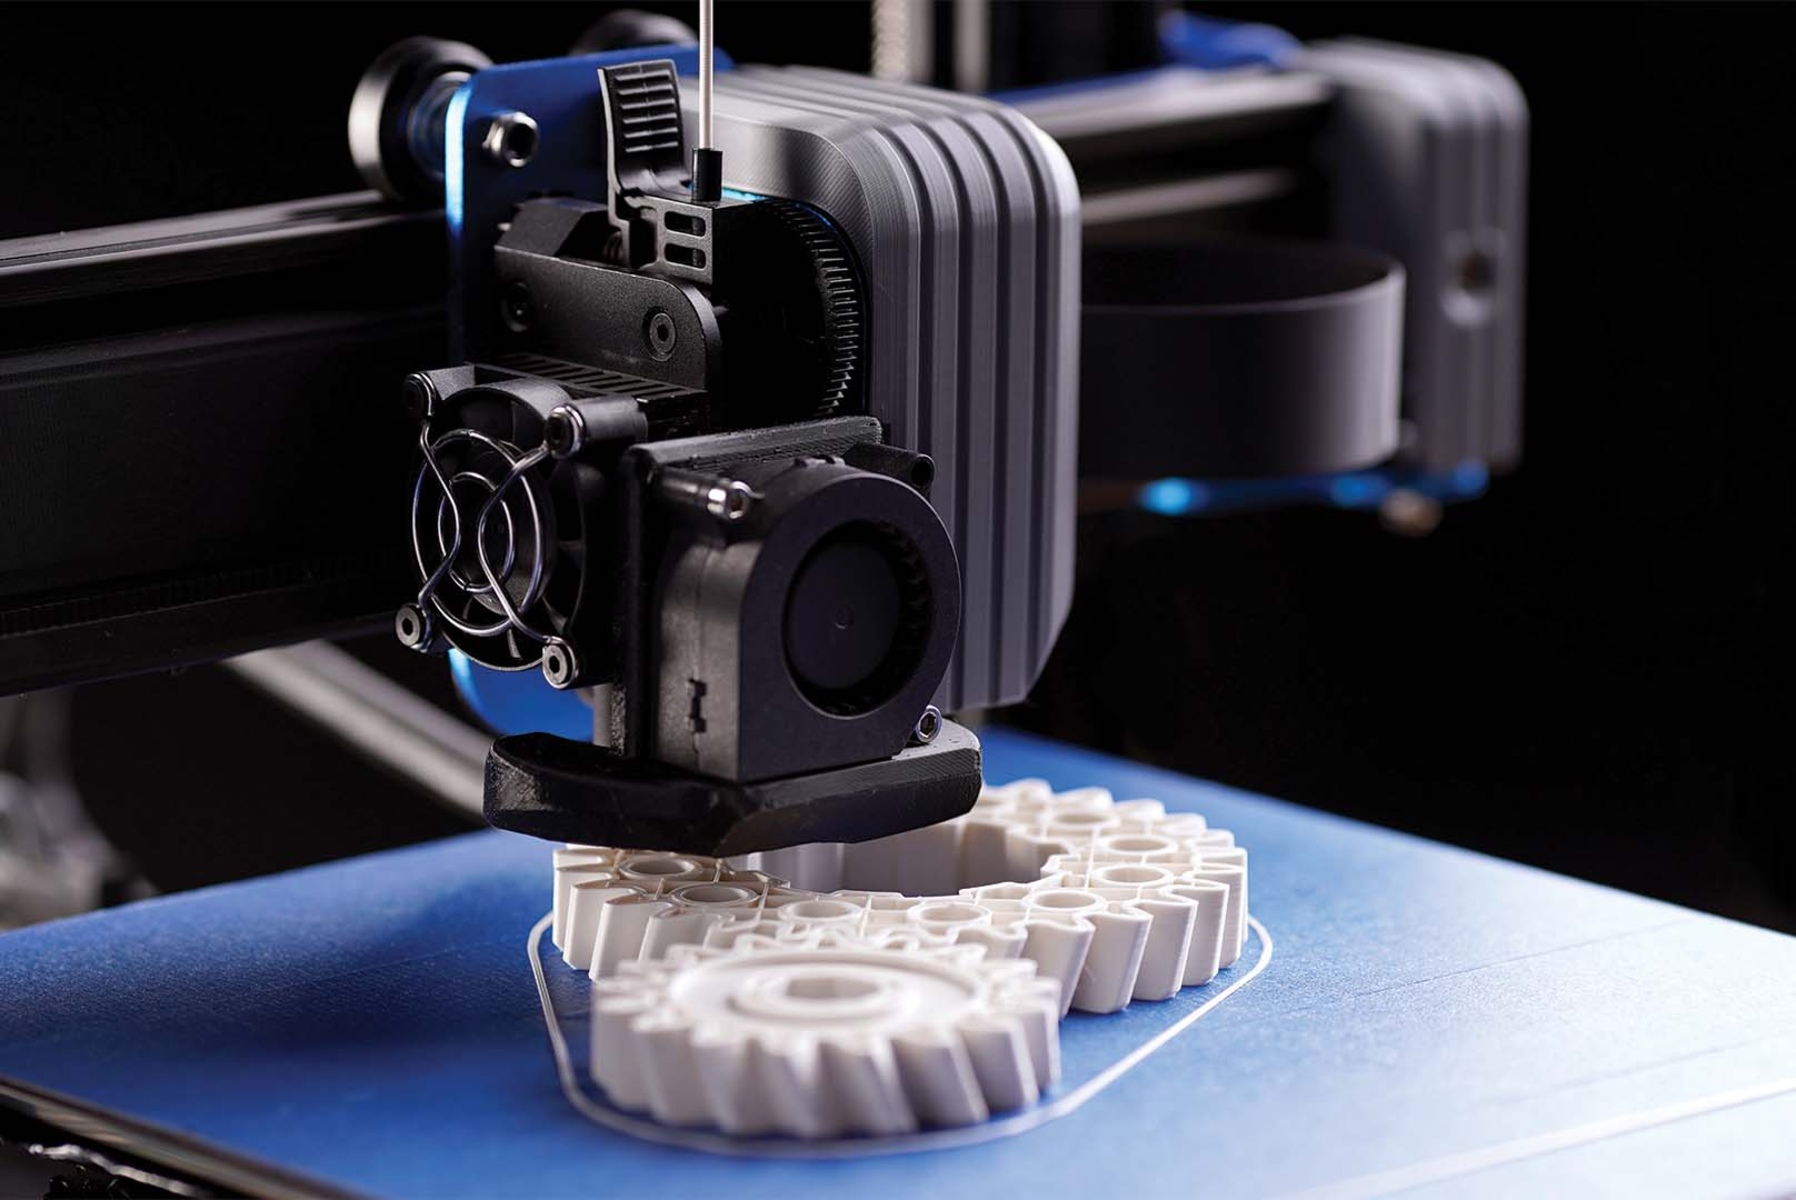 What Is Fdm In 3D Printing